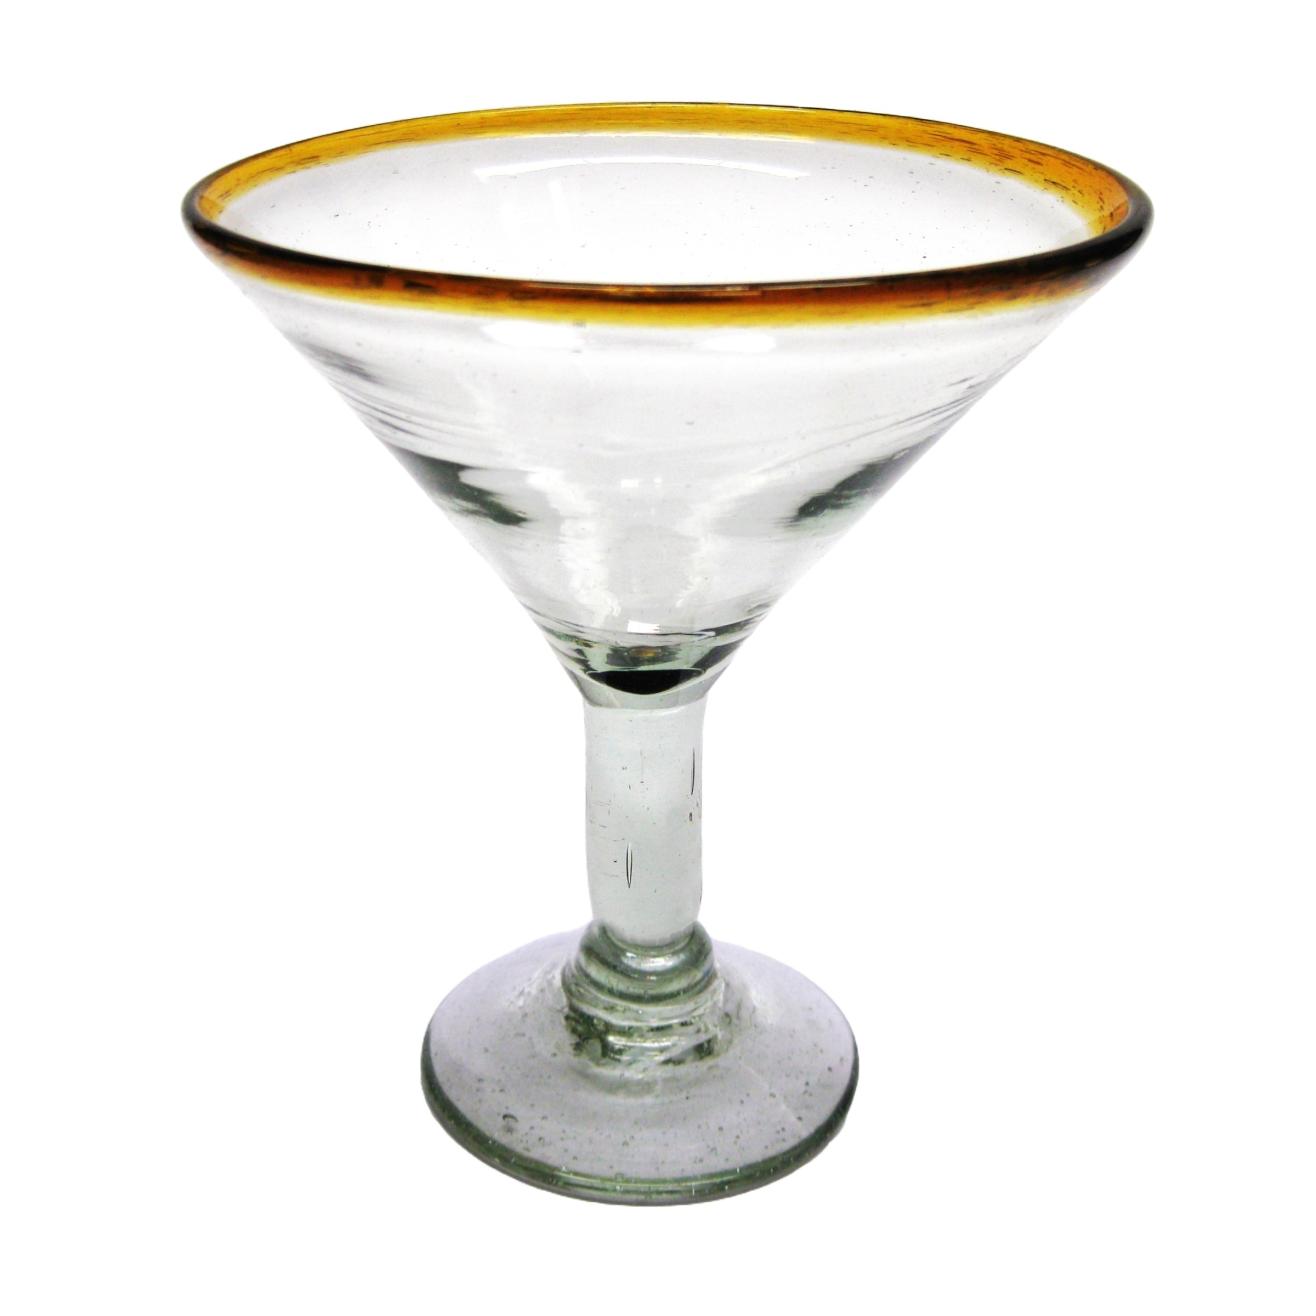 Wholesale Colored Rim Glassware / Amber Rim 10 oz Martini Glasses  / This wonderful set of martini glasses will bring a classic, mexican touch to your parties.